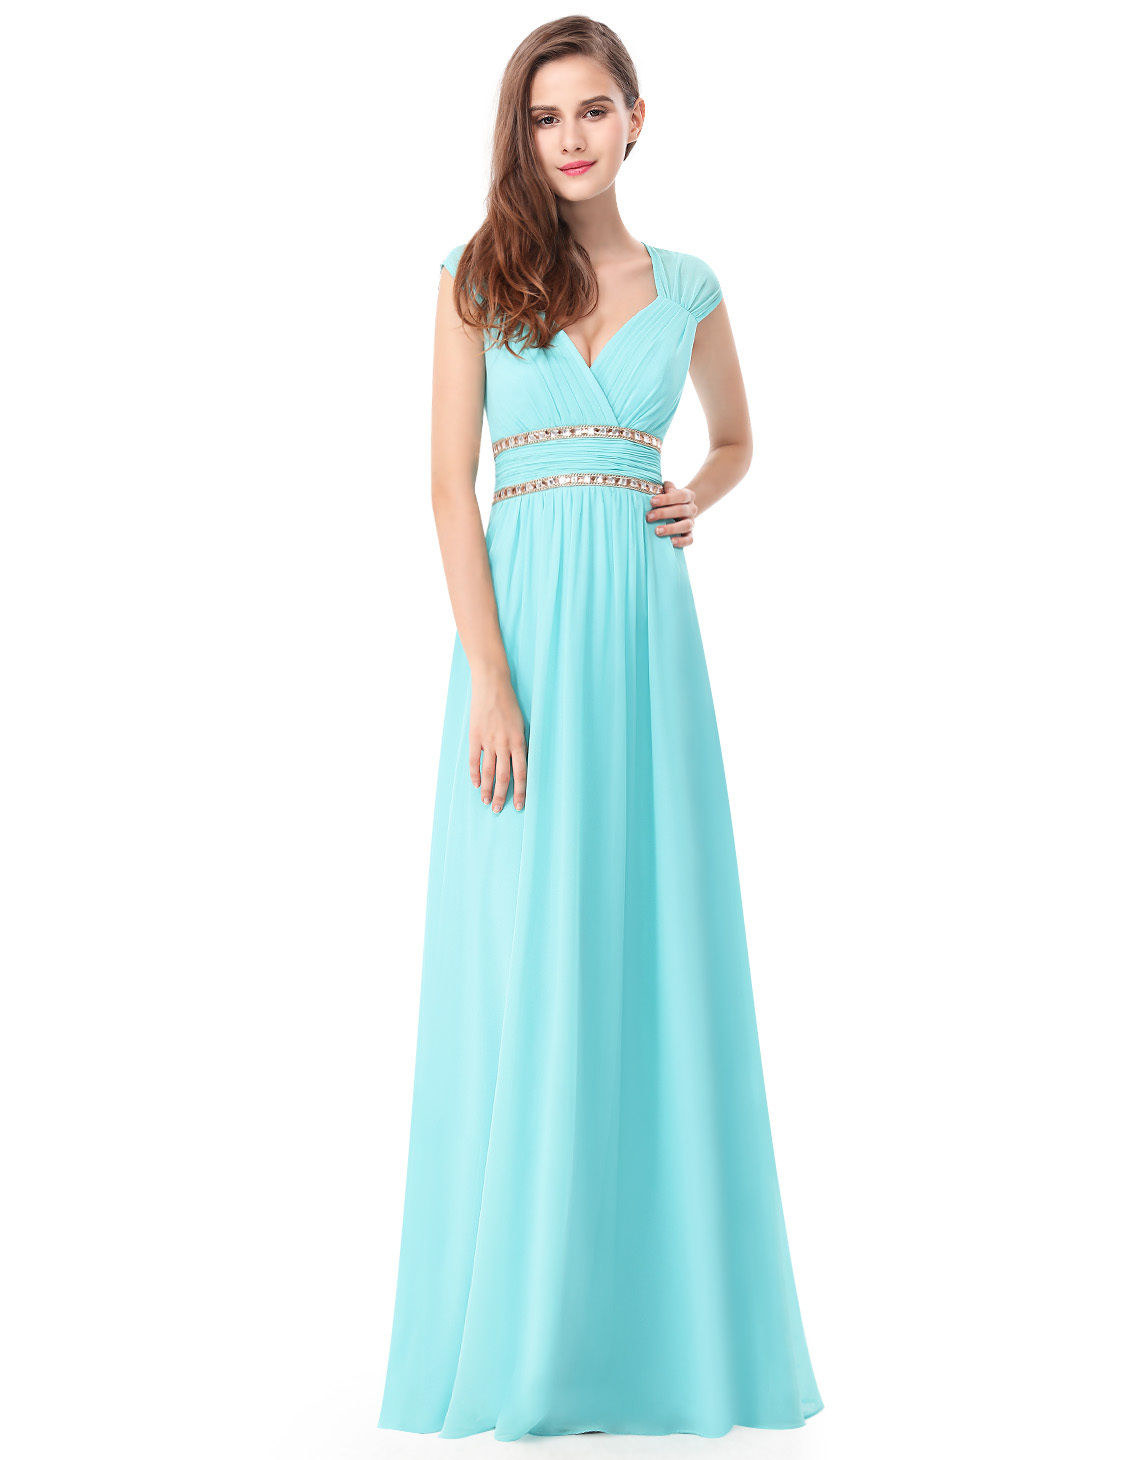 30 Of The Best Prom Dresses You Can Get On Amazon